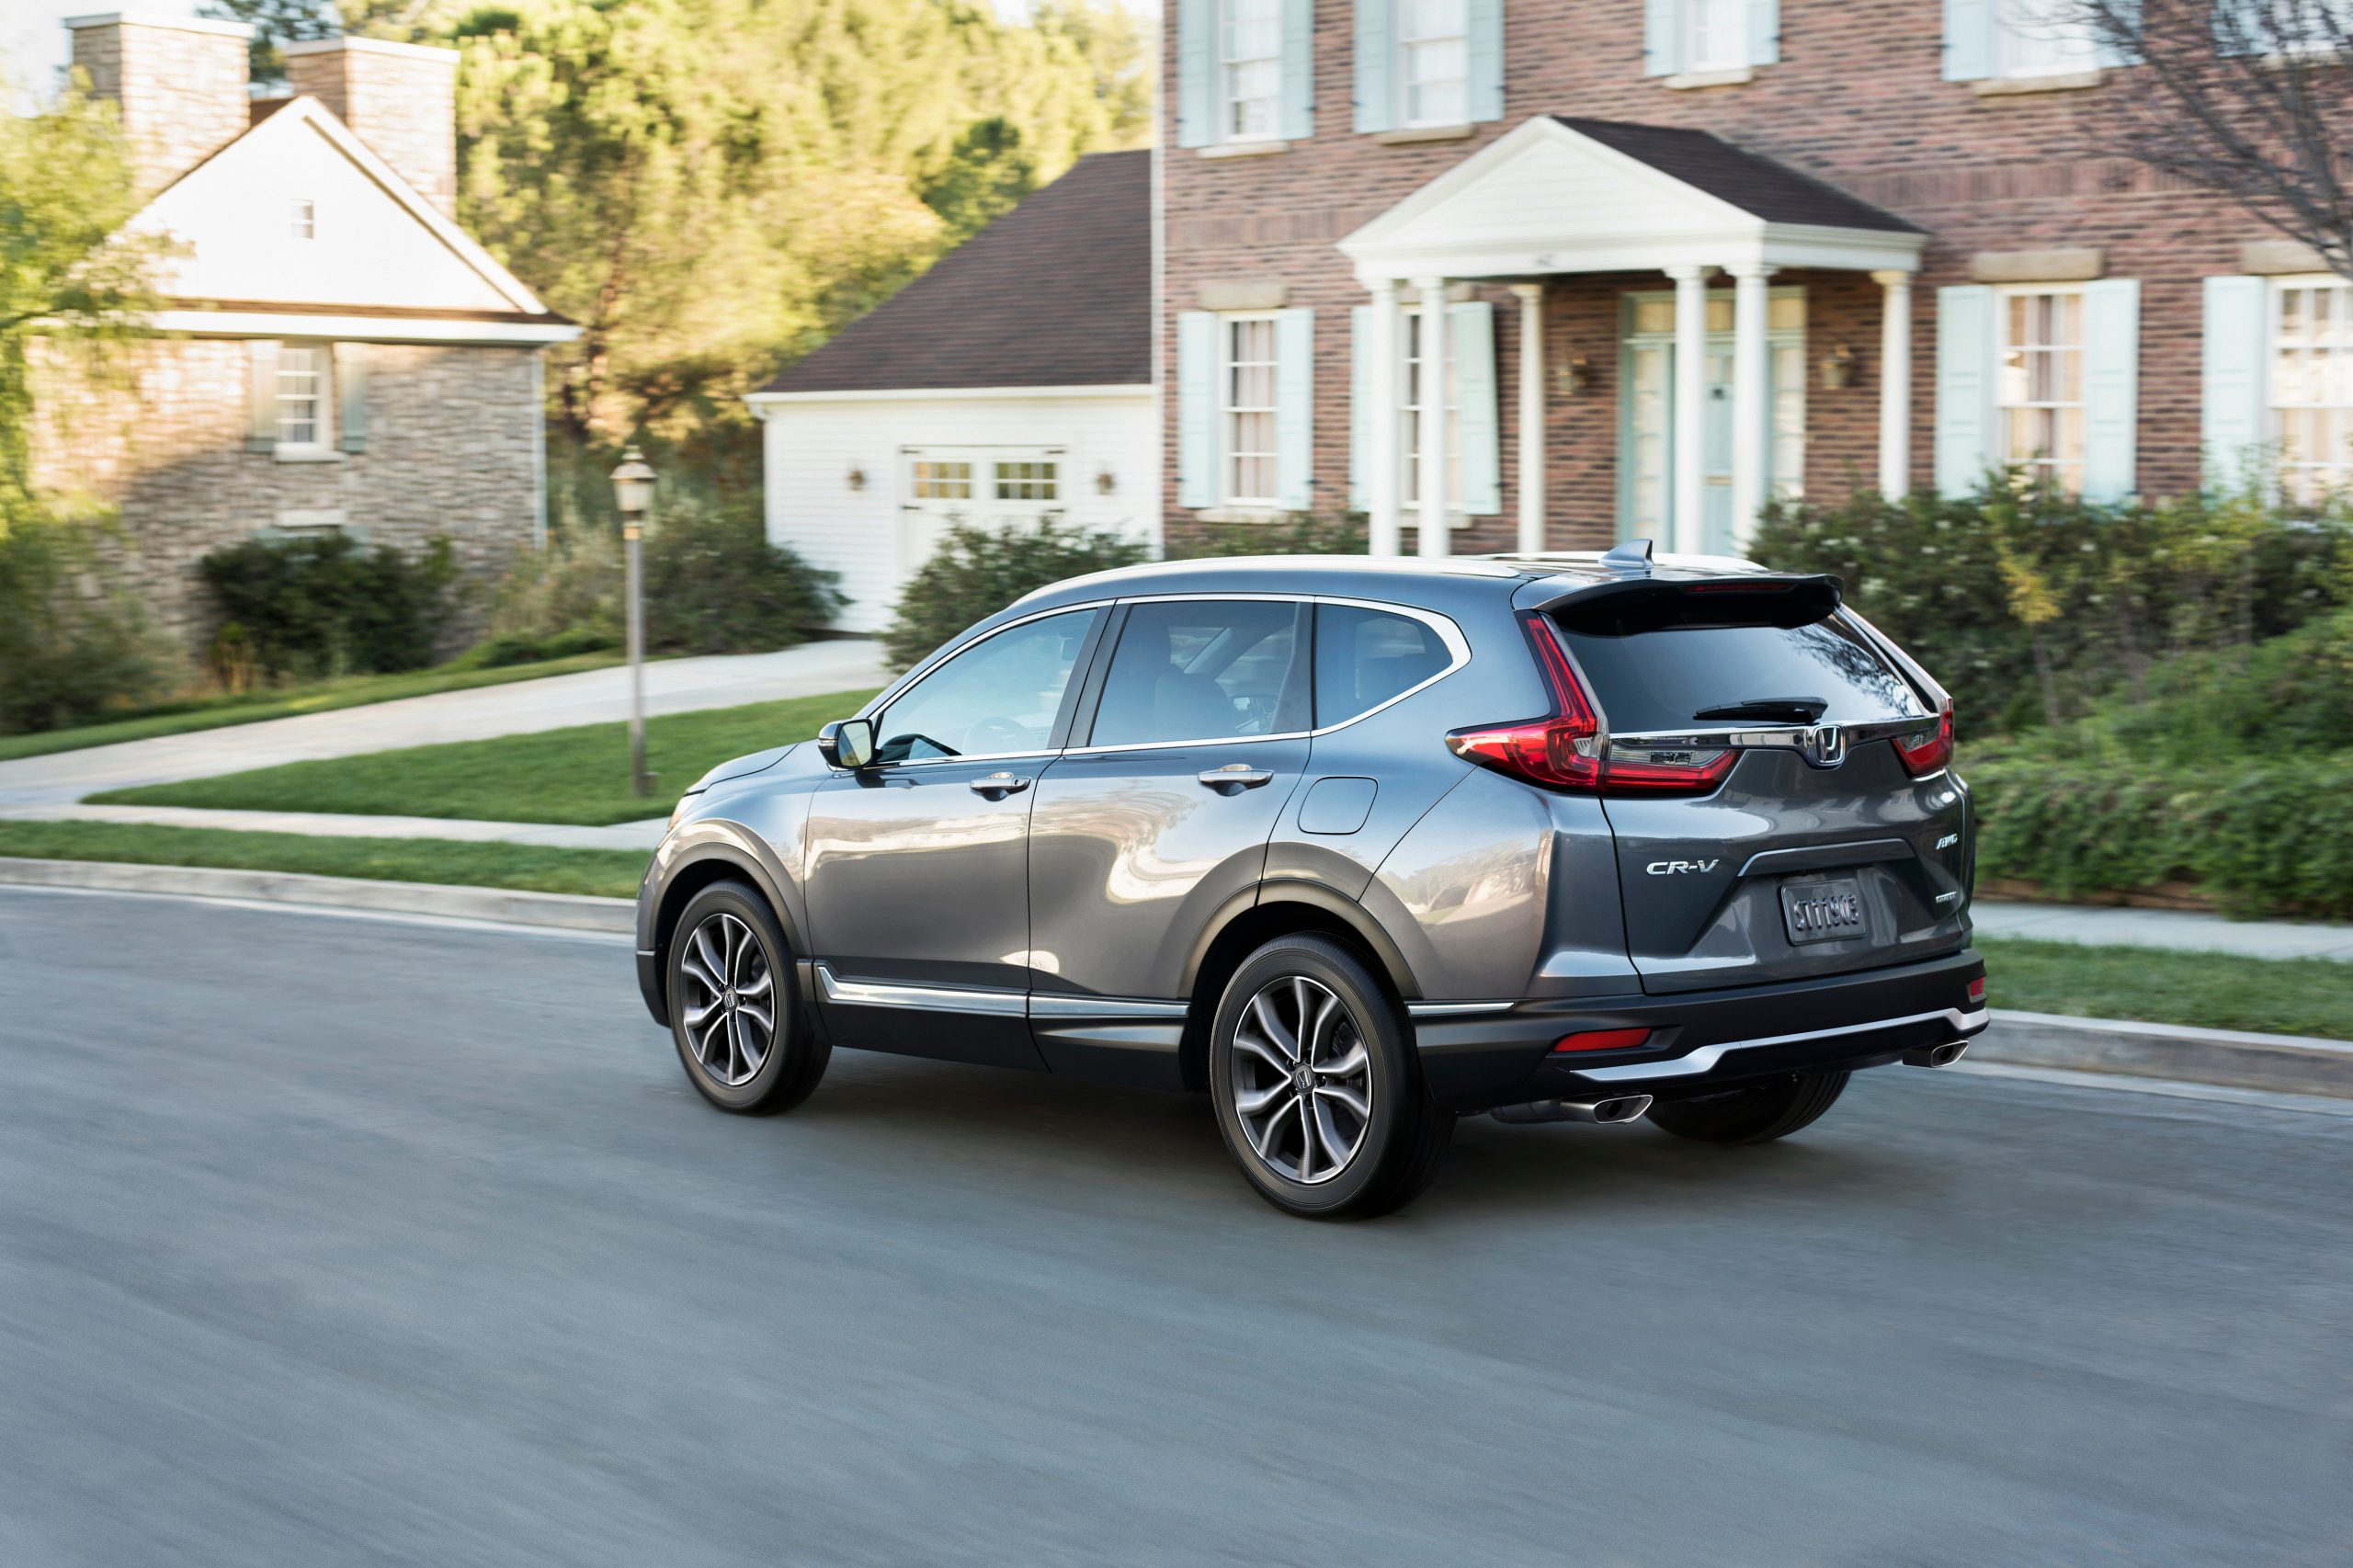 2020 Honda CR-V: Is the Touring Trim Worth the Extra Cost?